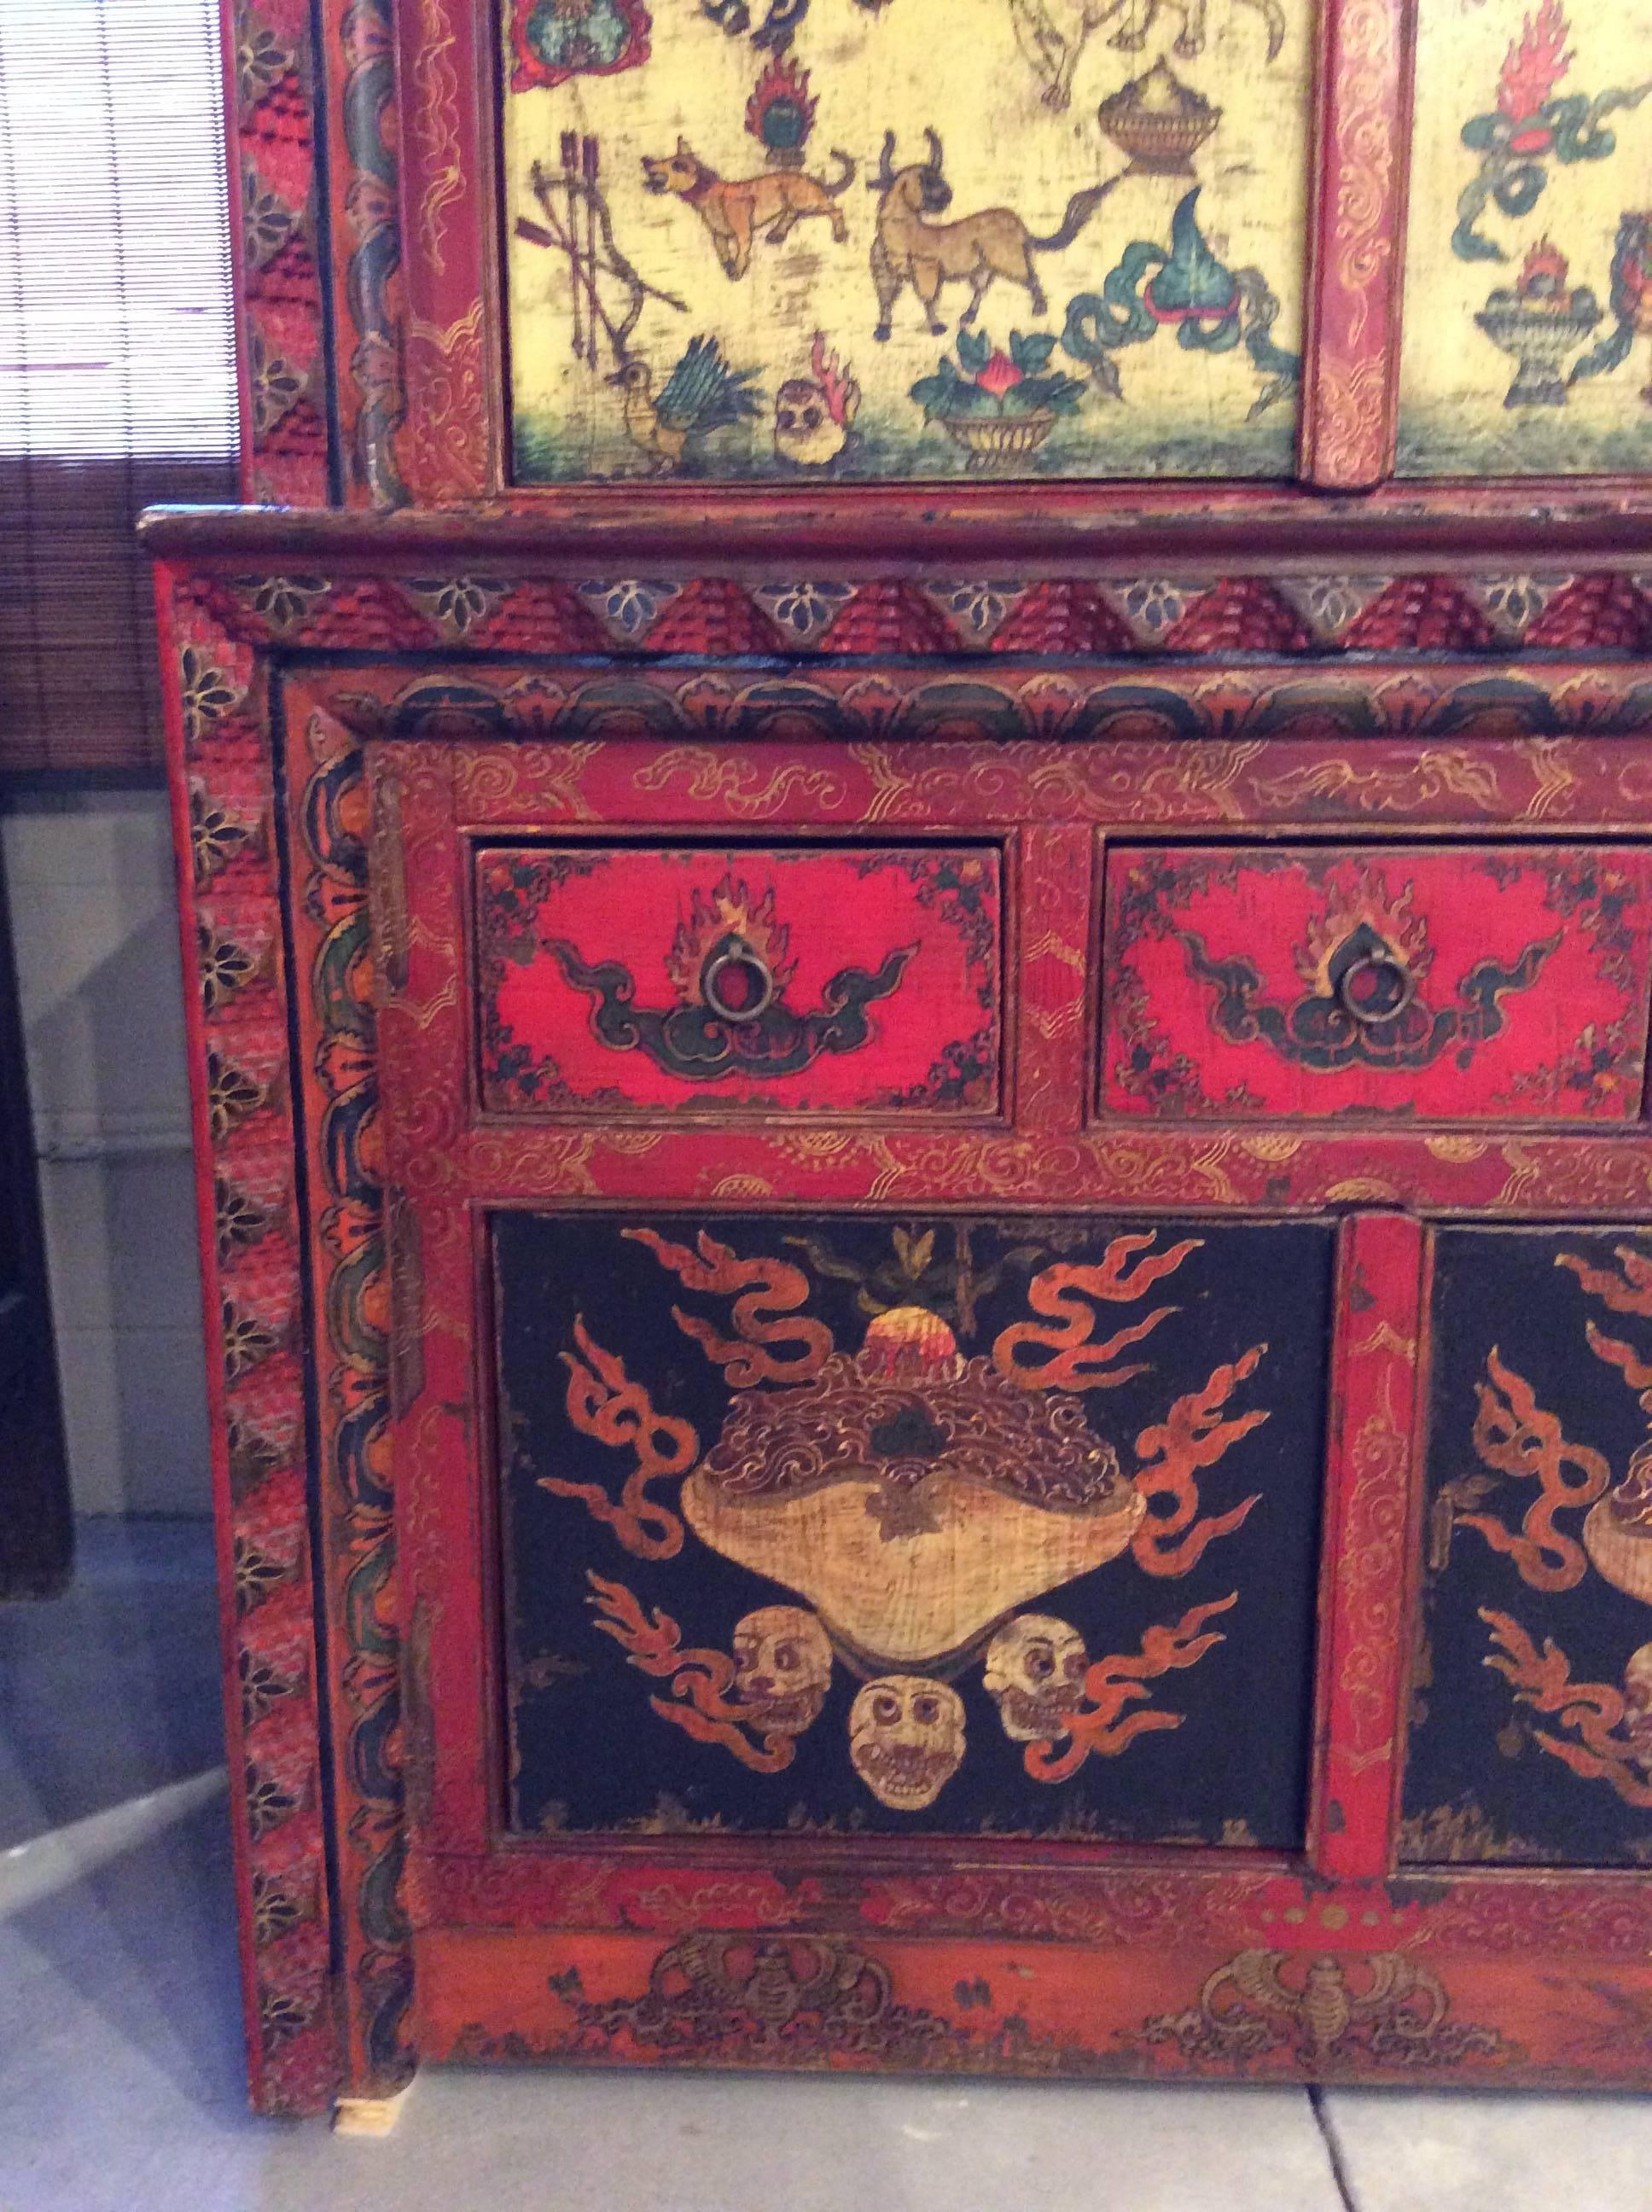 This antique cabinet is painted with a multitude of auspicious Tibetan Buddhist symbols, both decorative and figural.